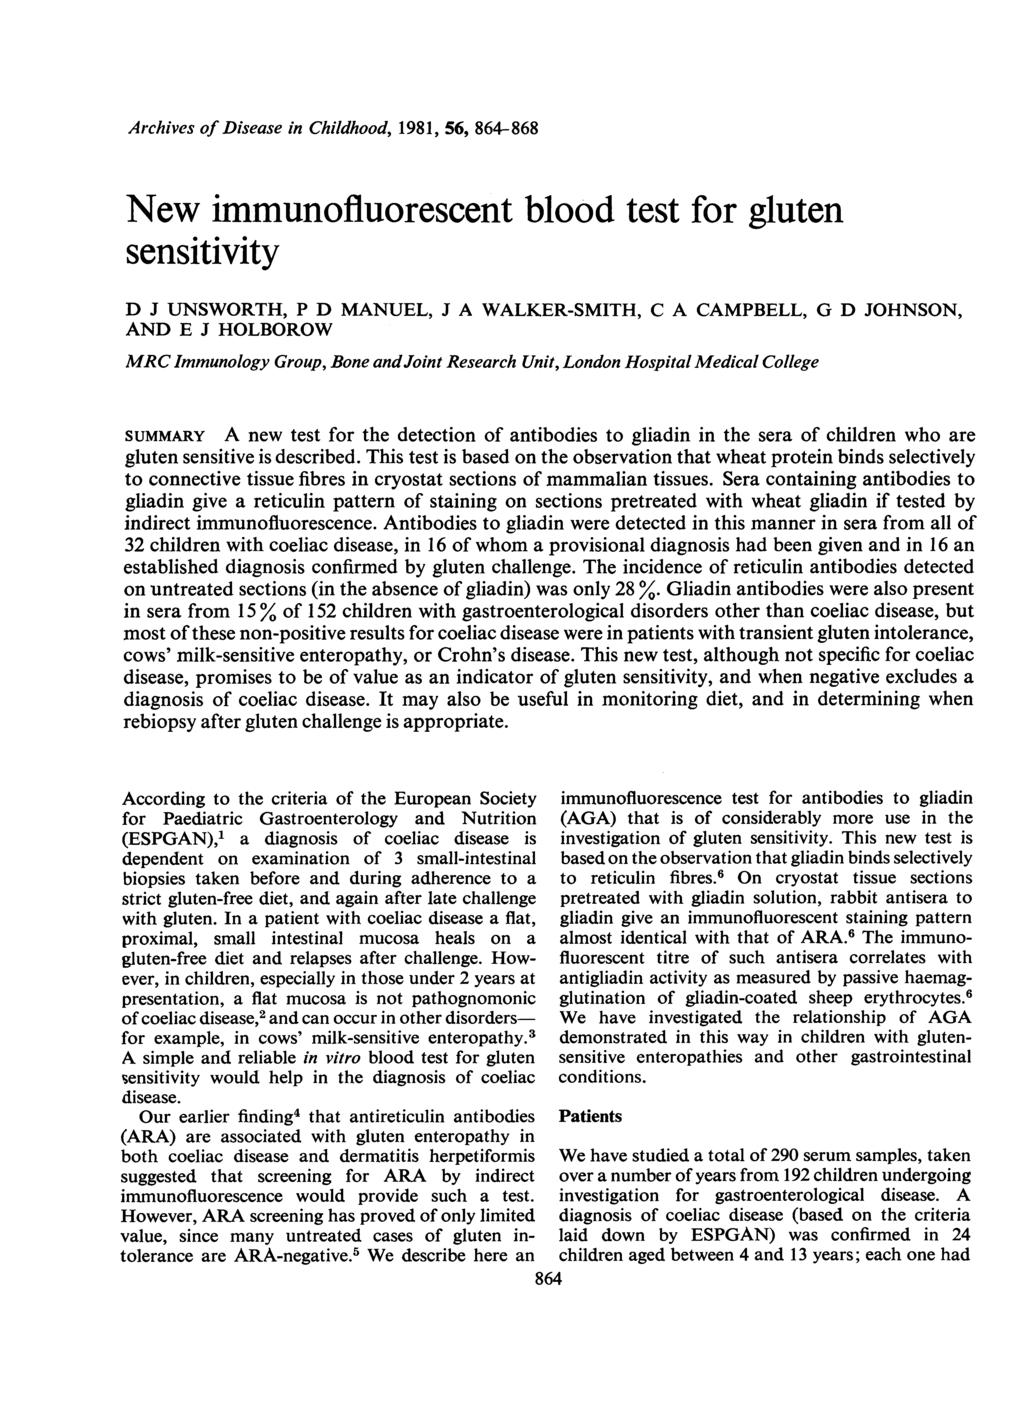 Archives of Disease in Childhood, 1981, 56, 864868 New immunofluorescent blood test for gluten sensitivity D J UNSWORTH, P D MANUEL, J A WALKERSMITH, C A CAMPBELL, G D JOHNSON, AND E J HOLBOROW MRC